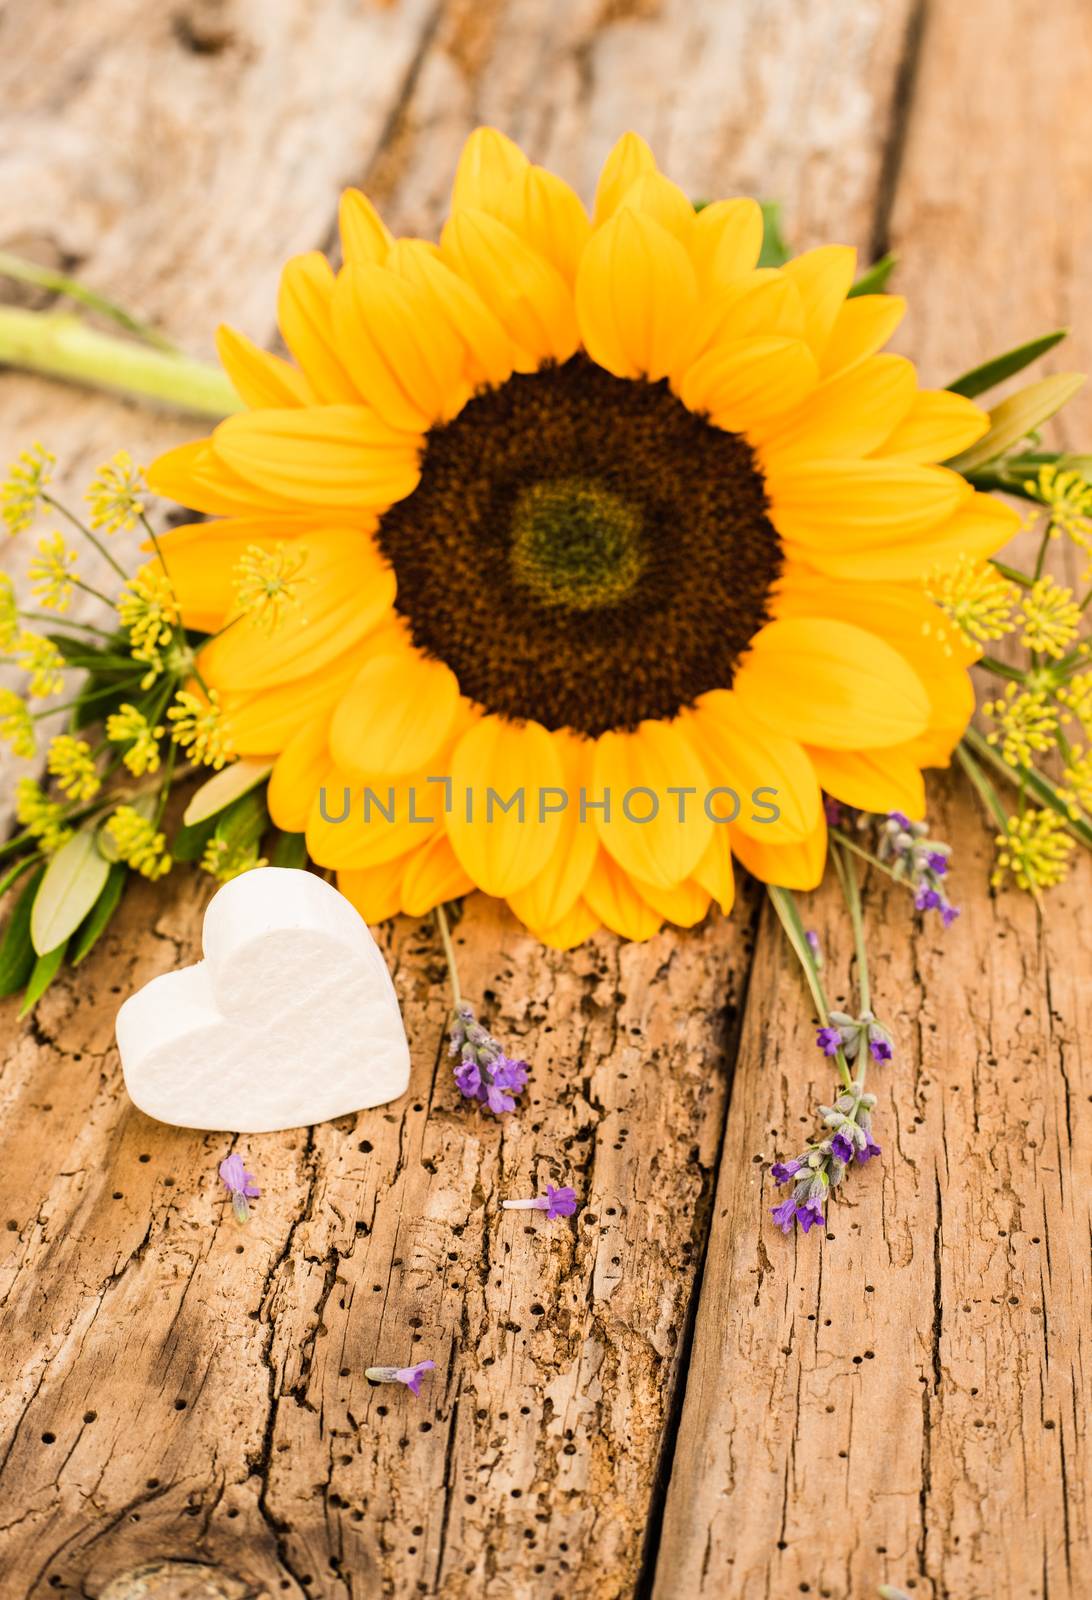 Mothers day flowers and heart by Vulcano